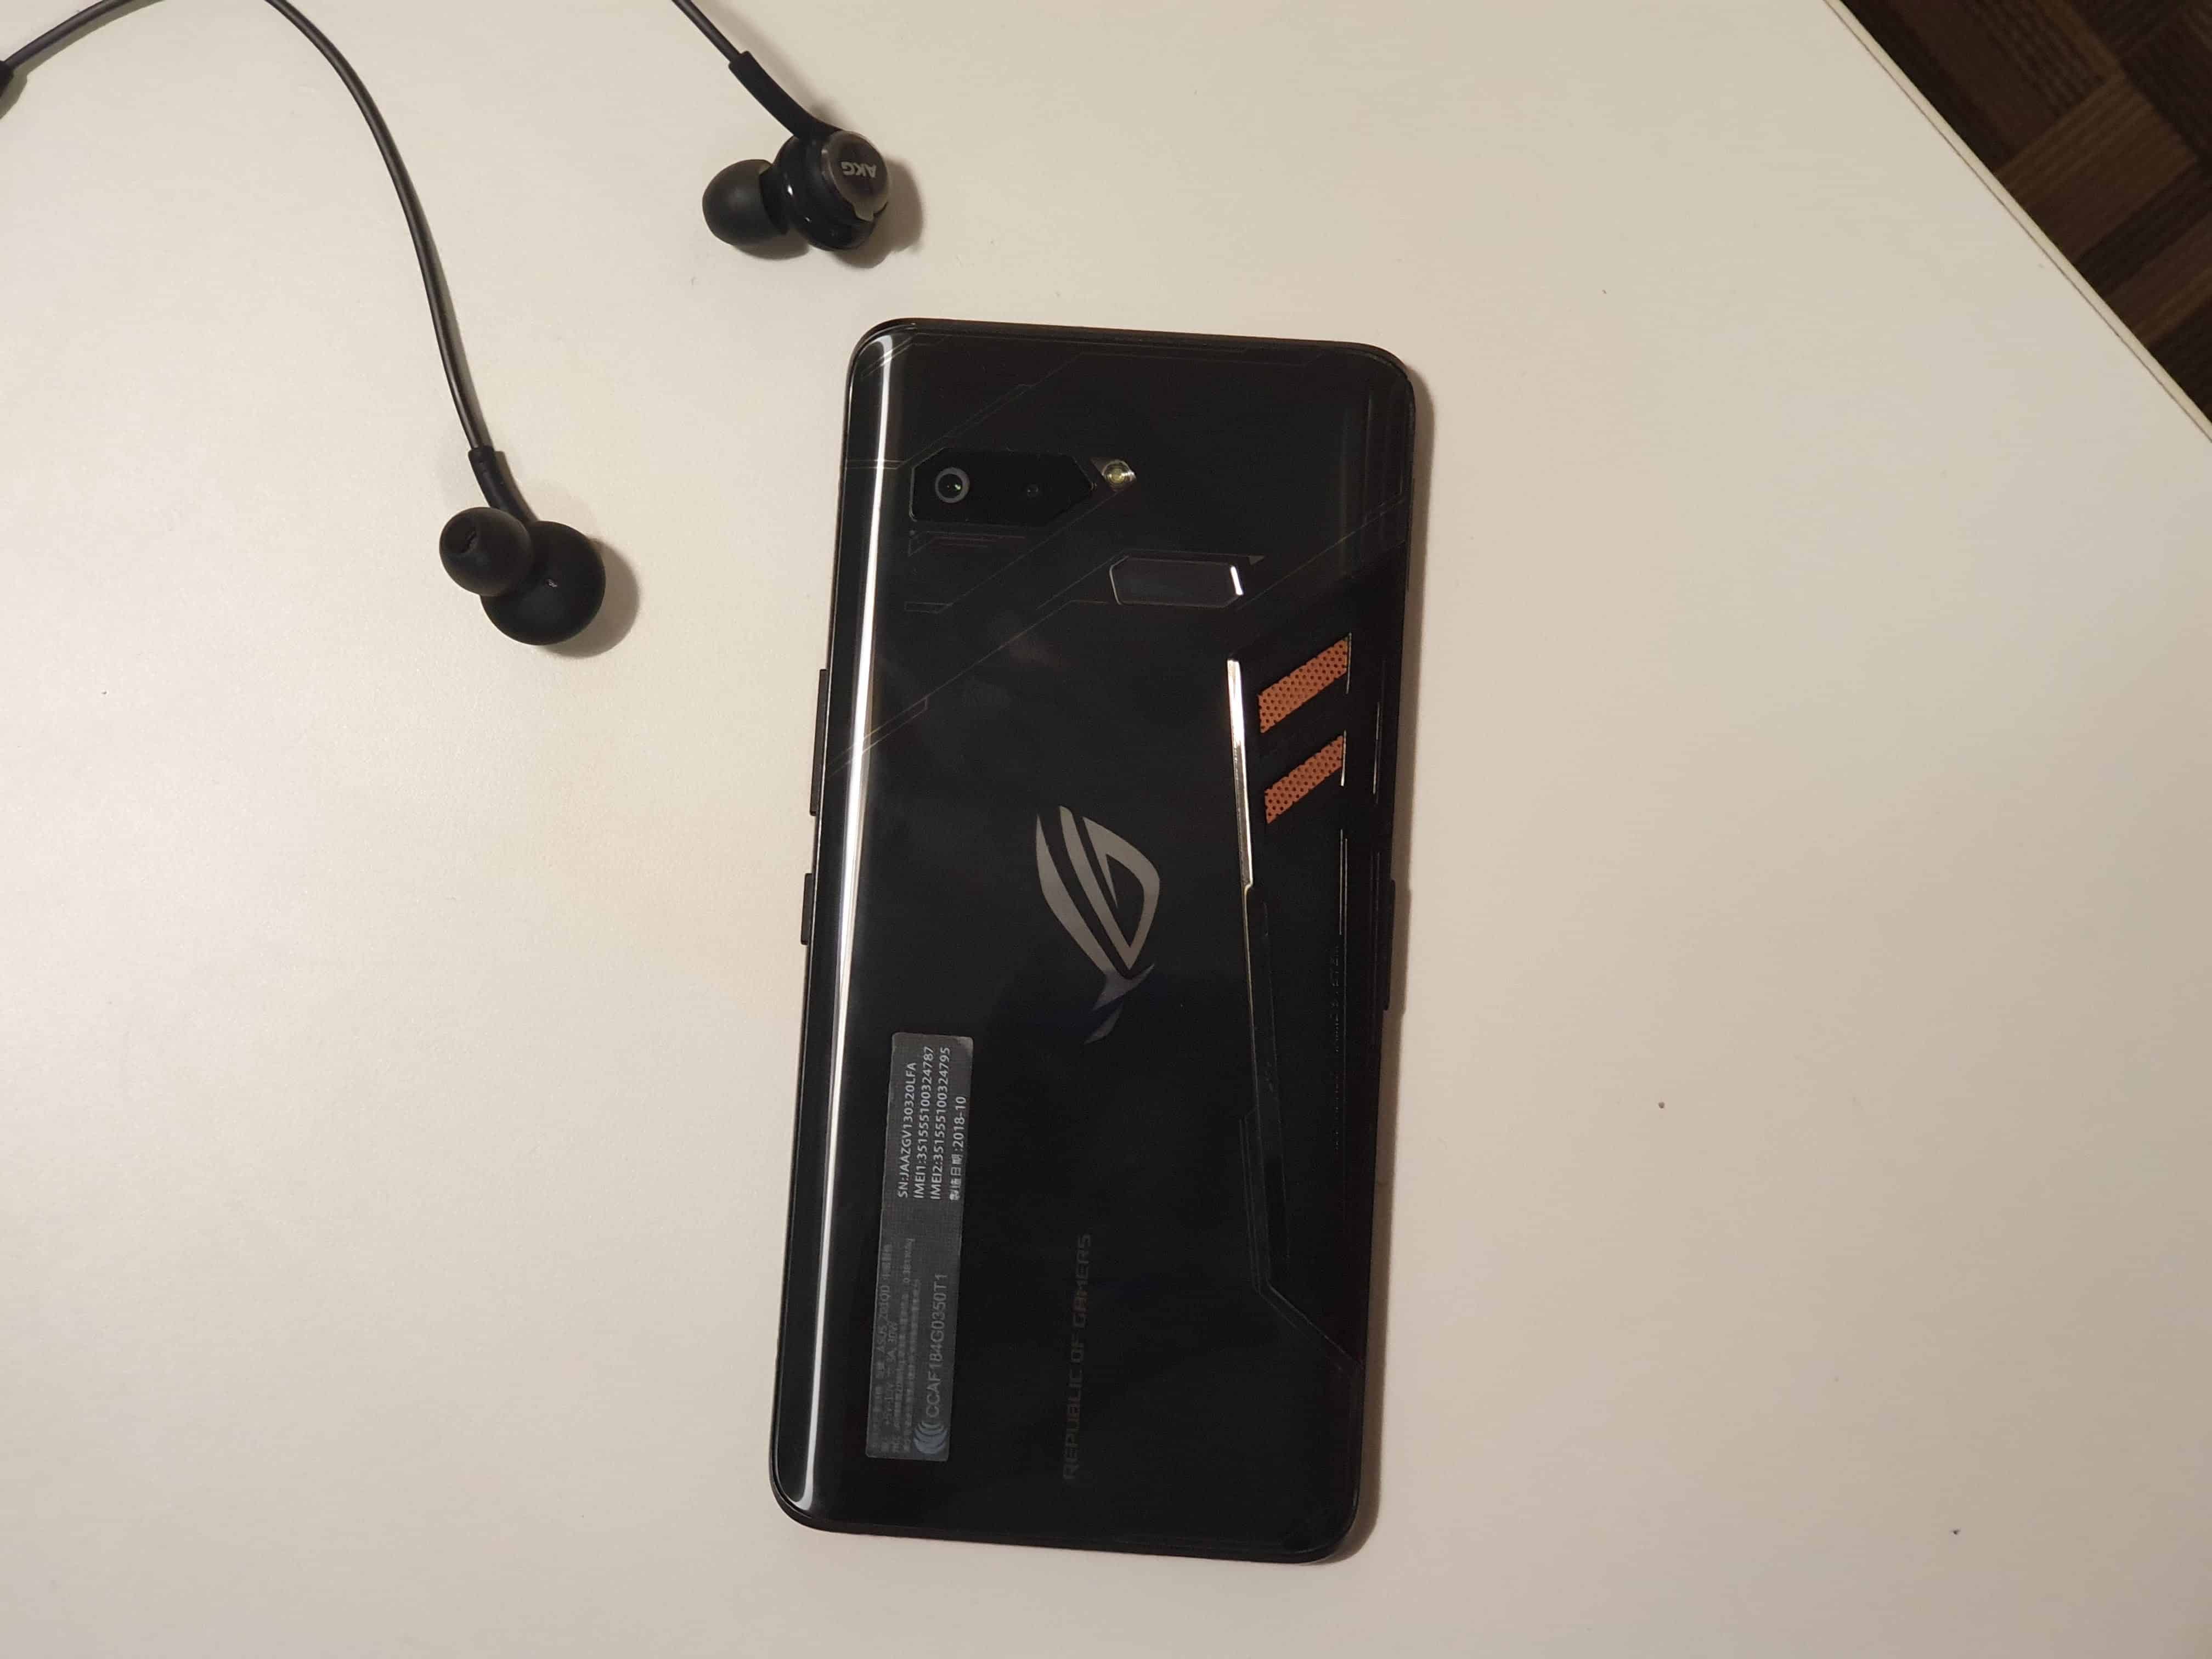 Asus ROG Phone Review - Should You Buy it? - 16